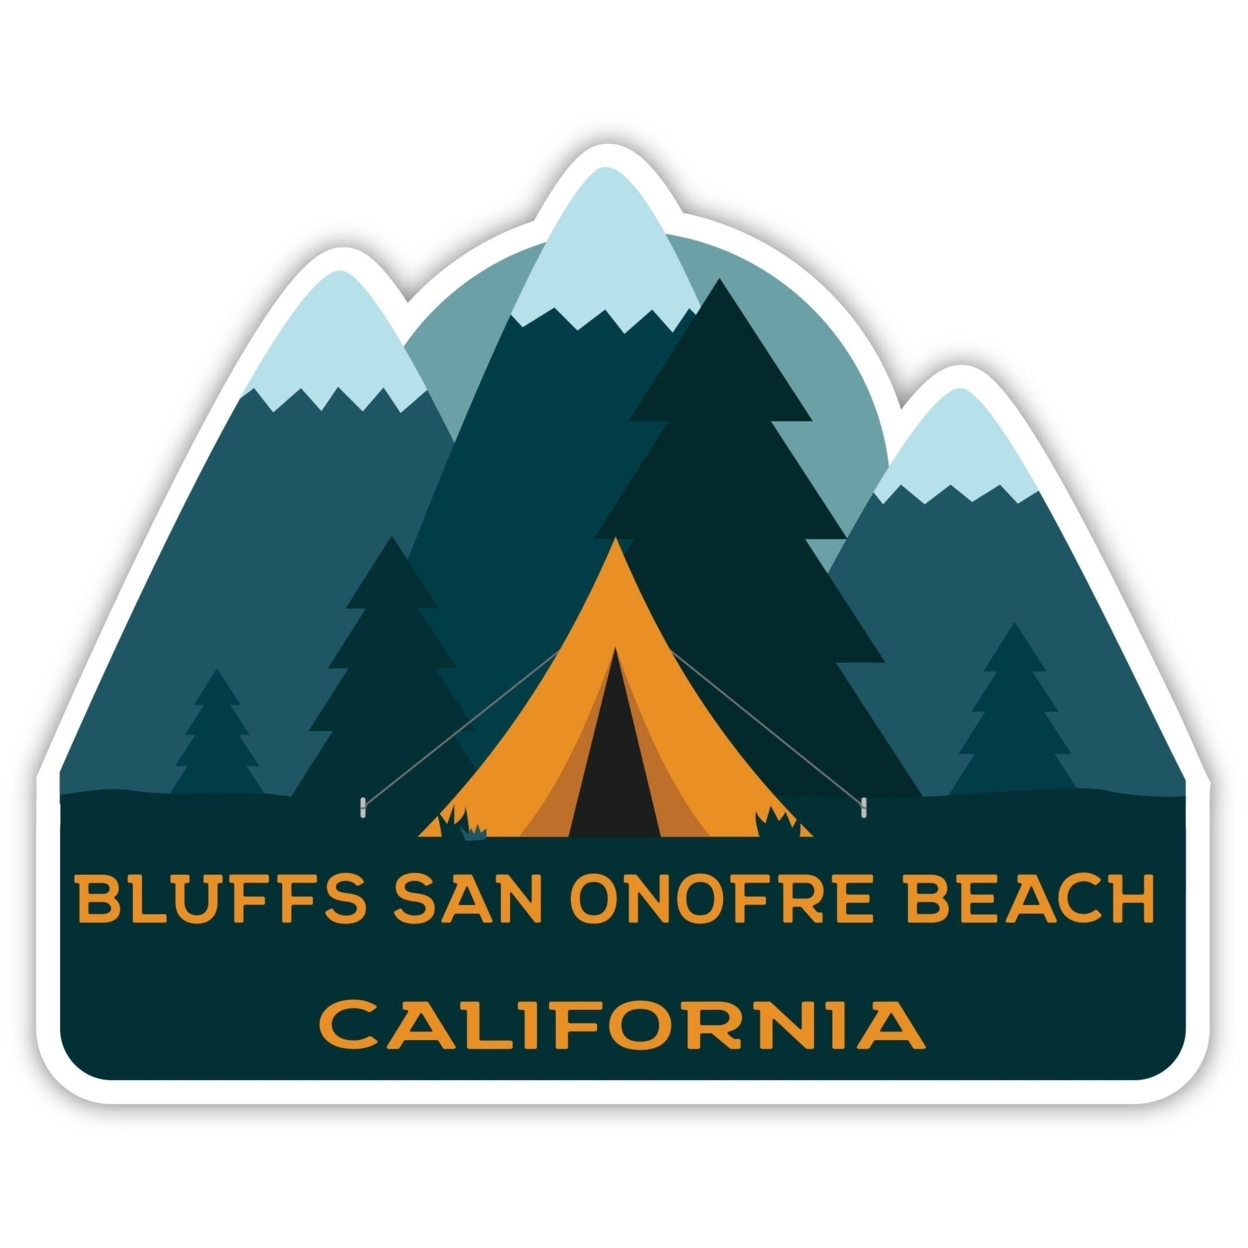 Bluffs San Onofre Beach California Souvenir Decorative Stickers (Choose Theme And Size) - 4-Pack, 12-Inch, Adventures Awaits